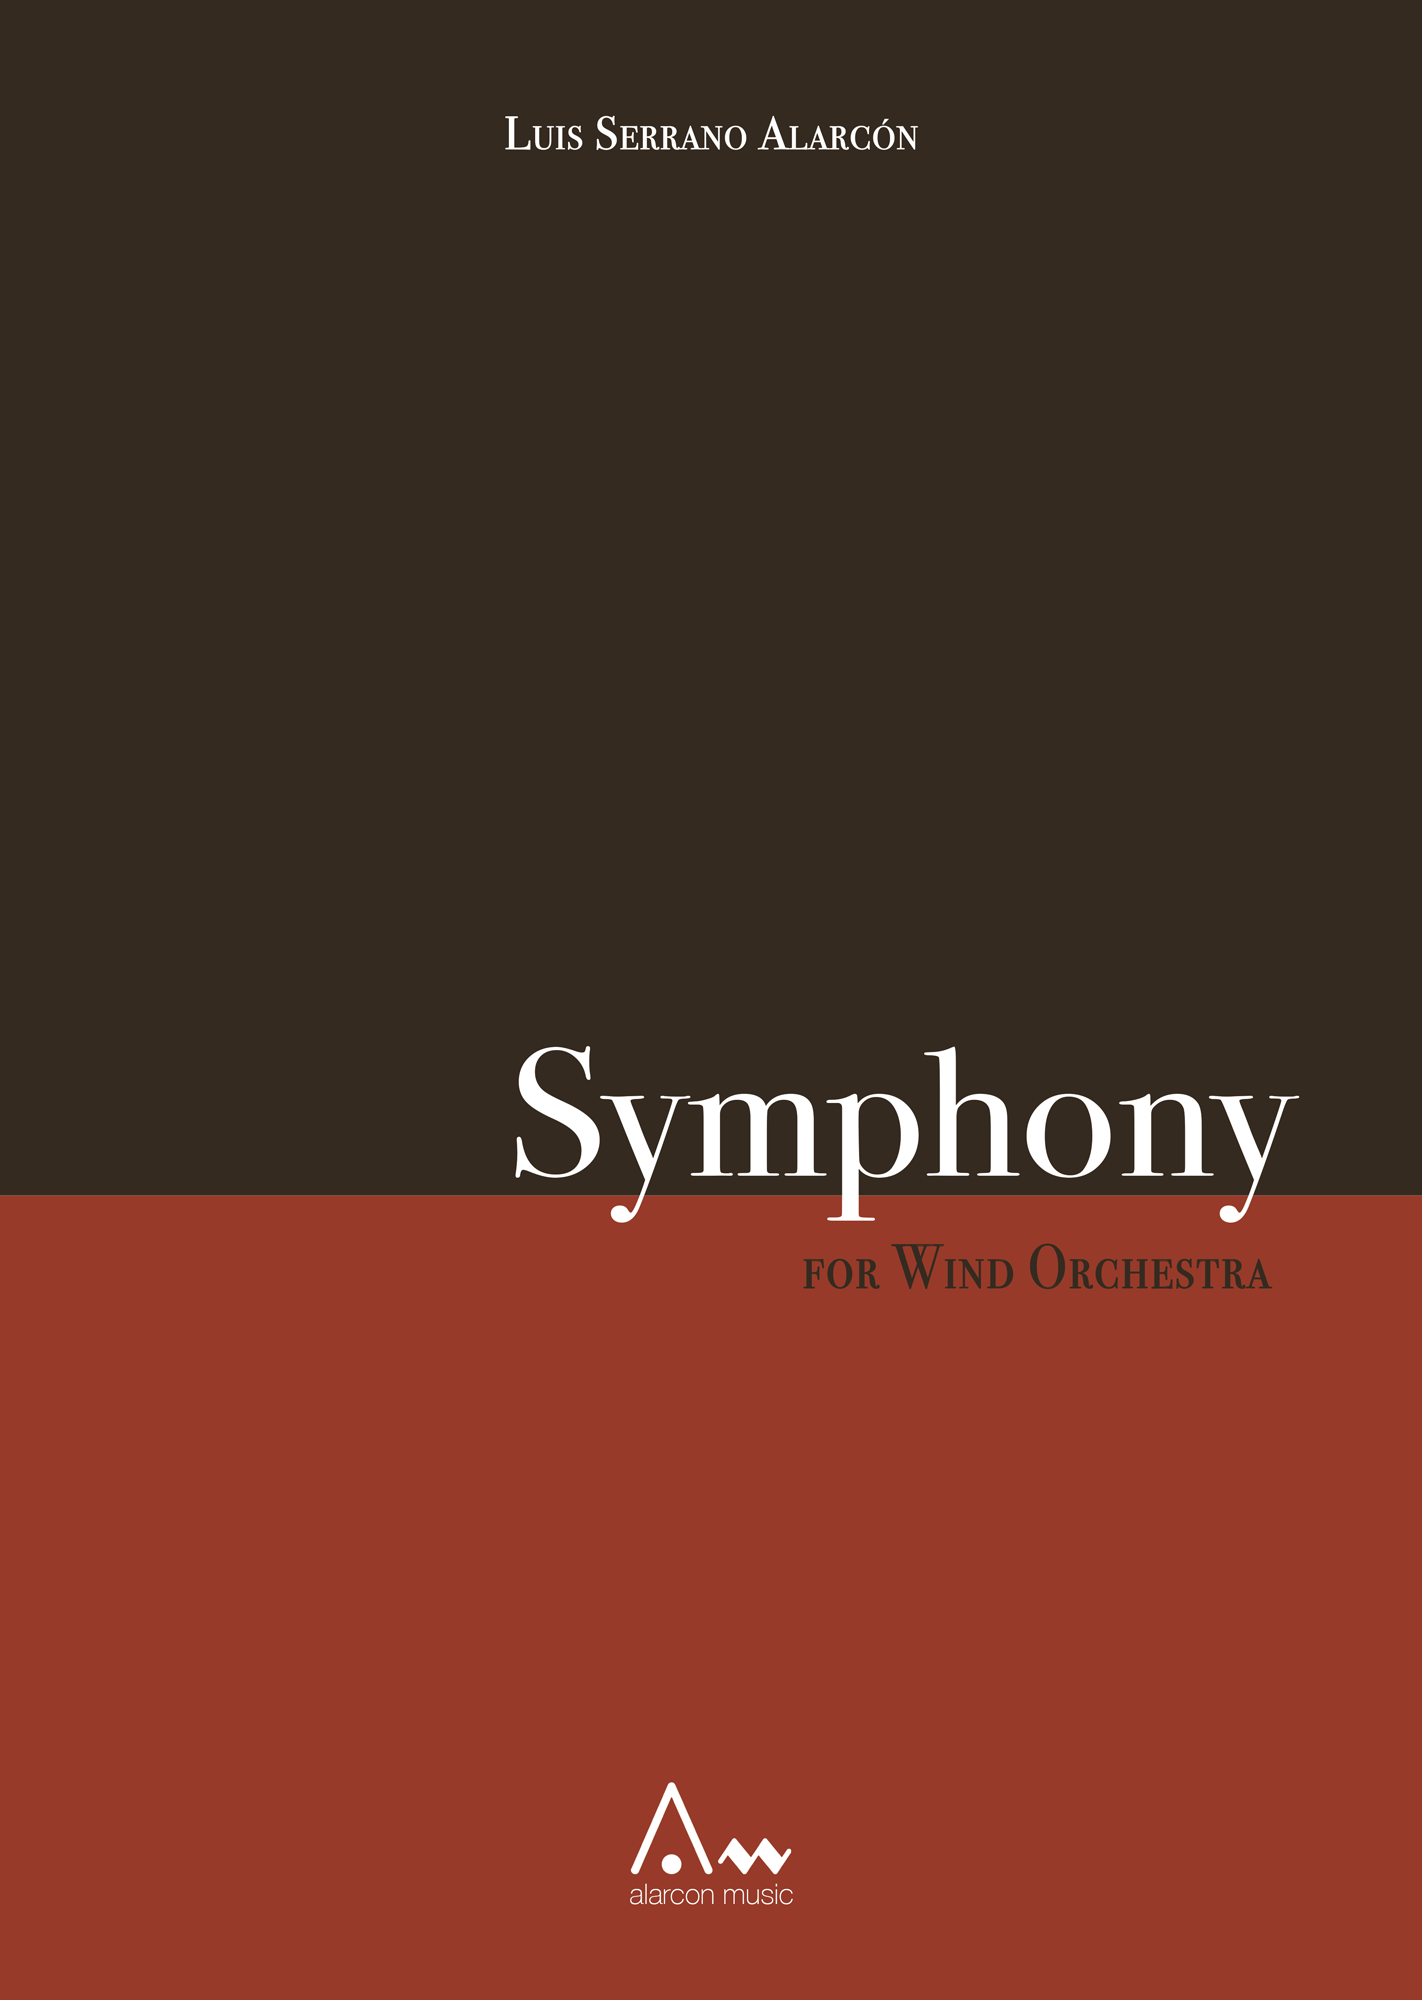 Symphony for Wind Orchestra